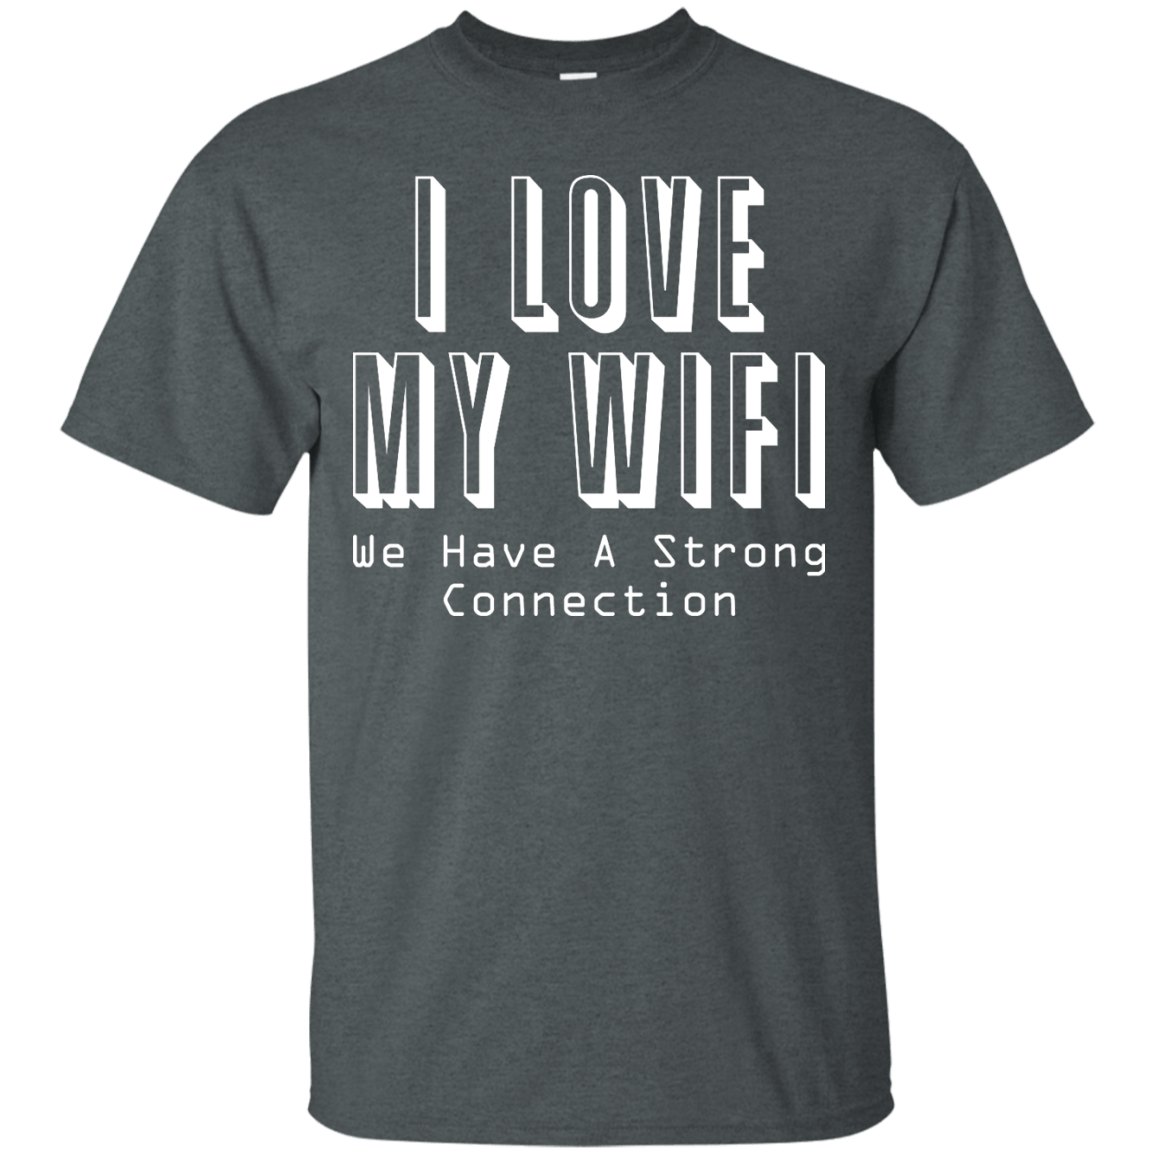 I Love My WiFi - We Have A Strong Connection